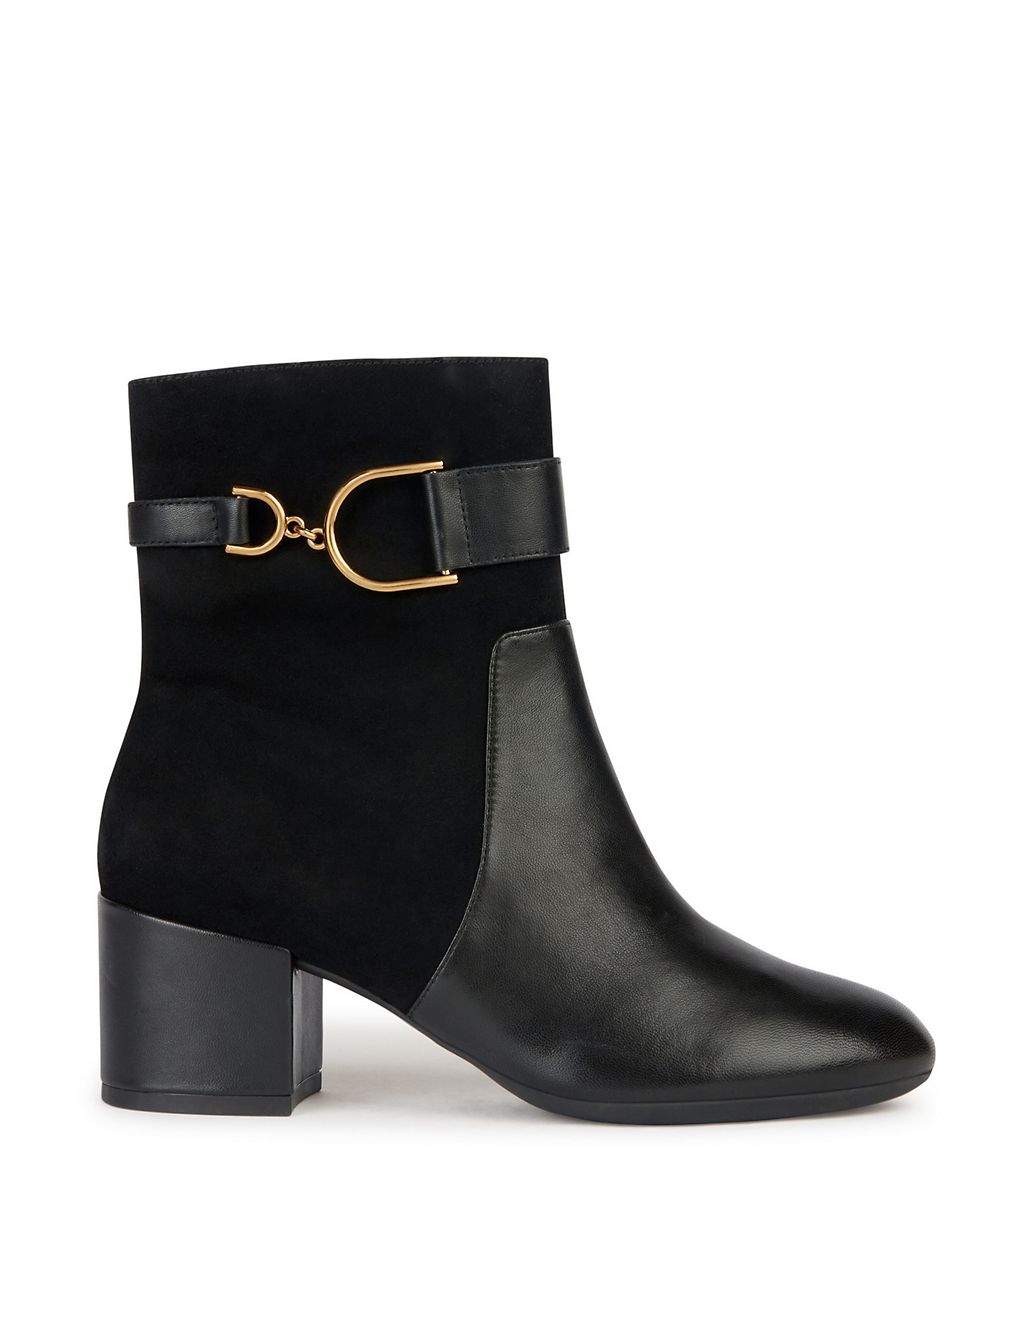 Leather & Suede Block Heel Ankle Boots | Geox | M&S